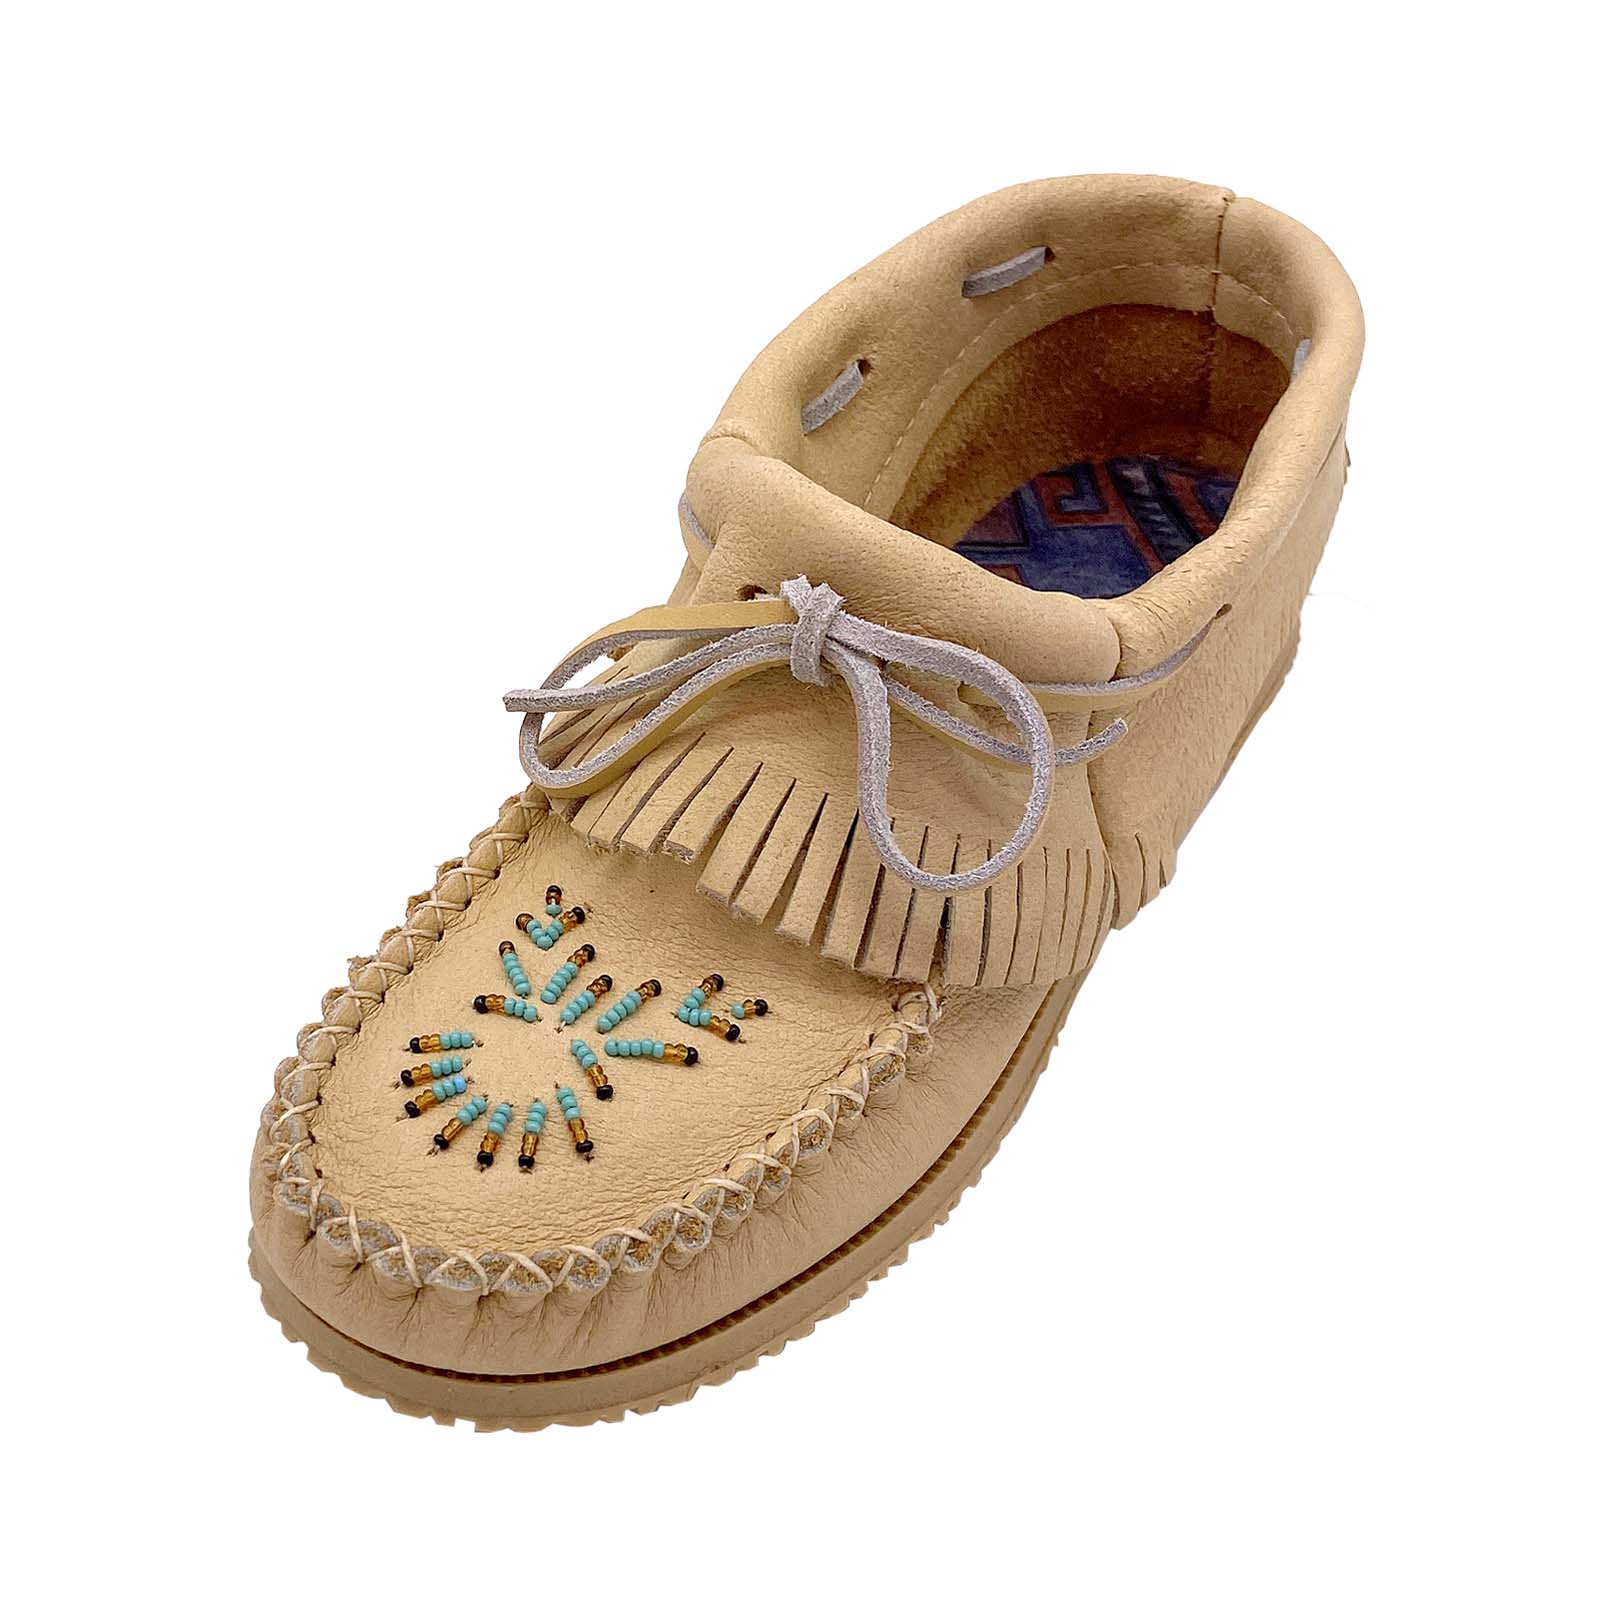 Women's Beaded Moose Hide Leather Moccasin Shoes